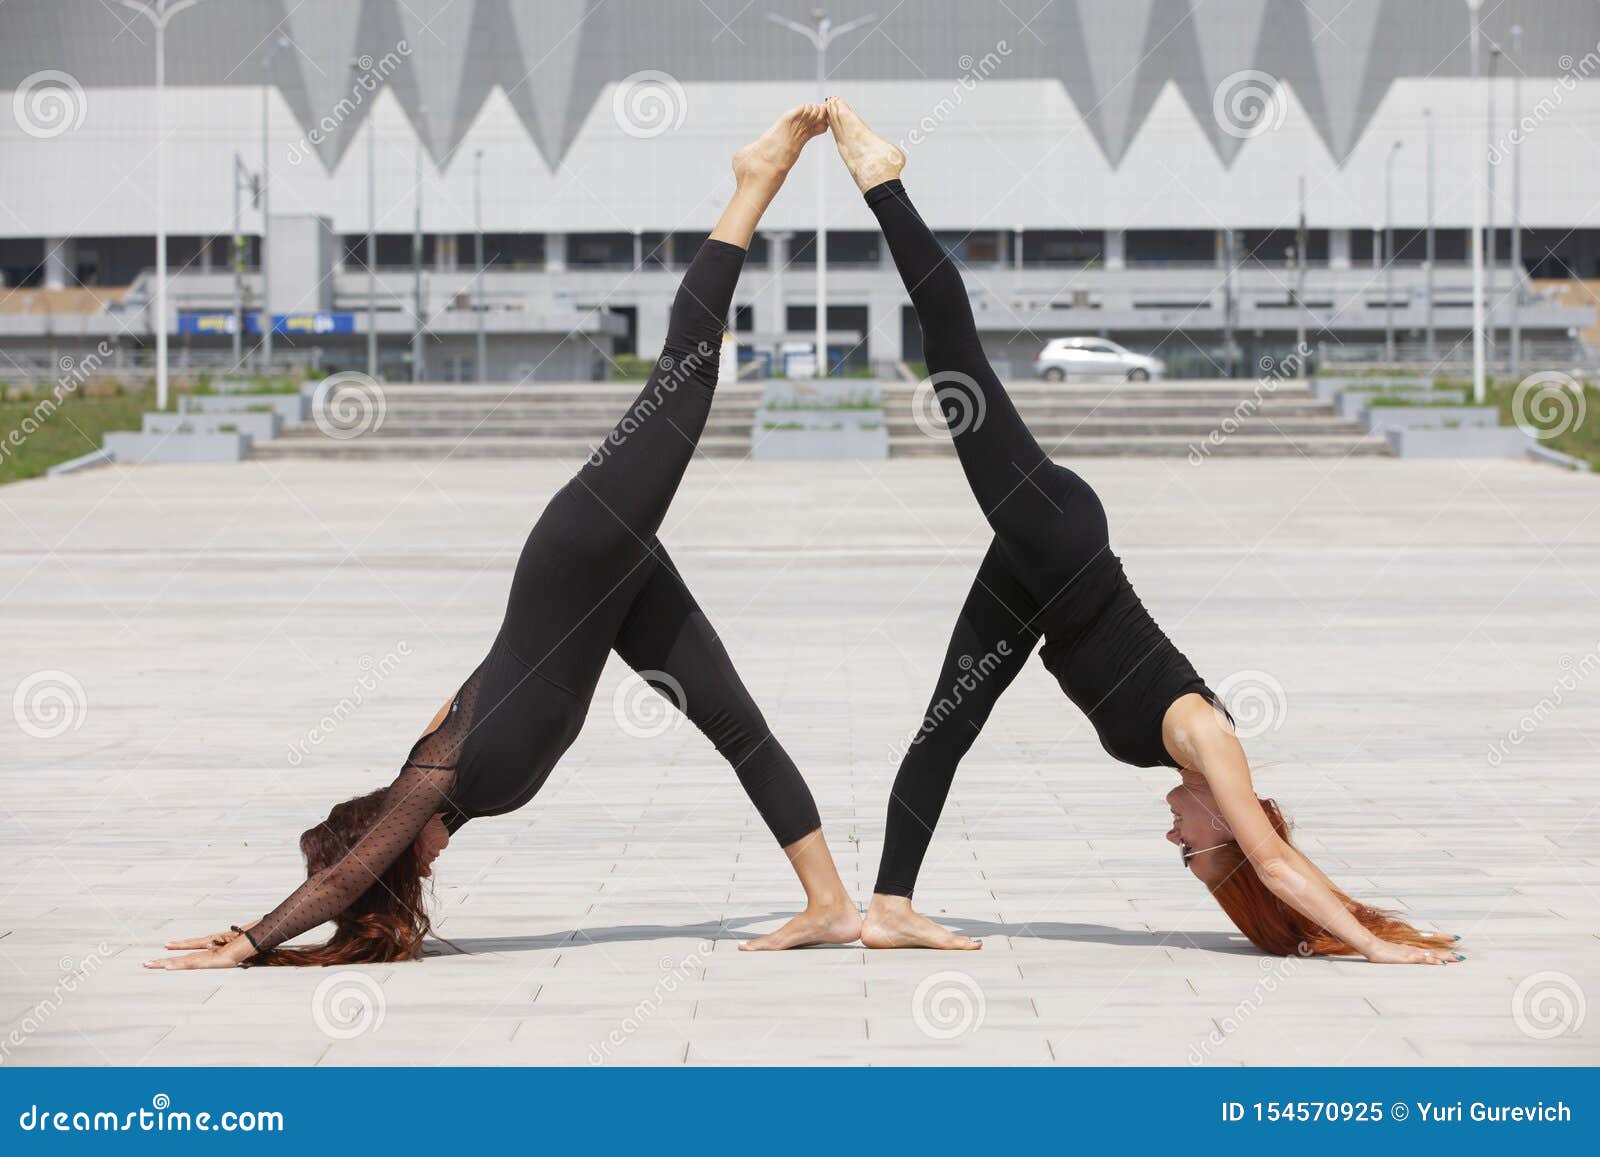 Acro stunts 2 people | Yoga poses for two, Two person yoga poses, Two person  yoga